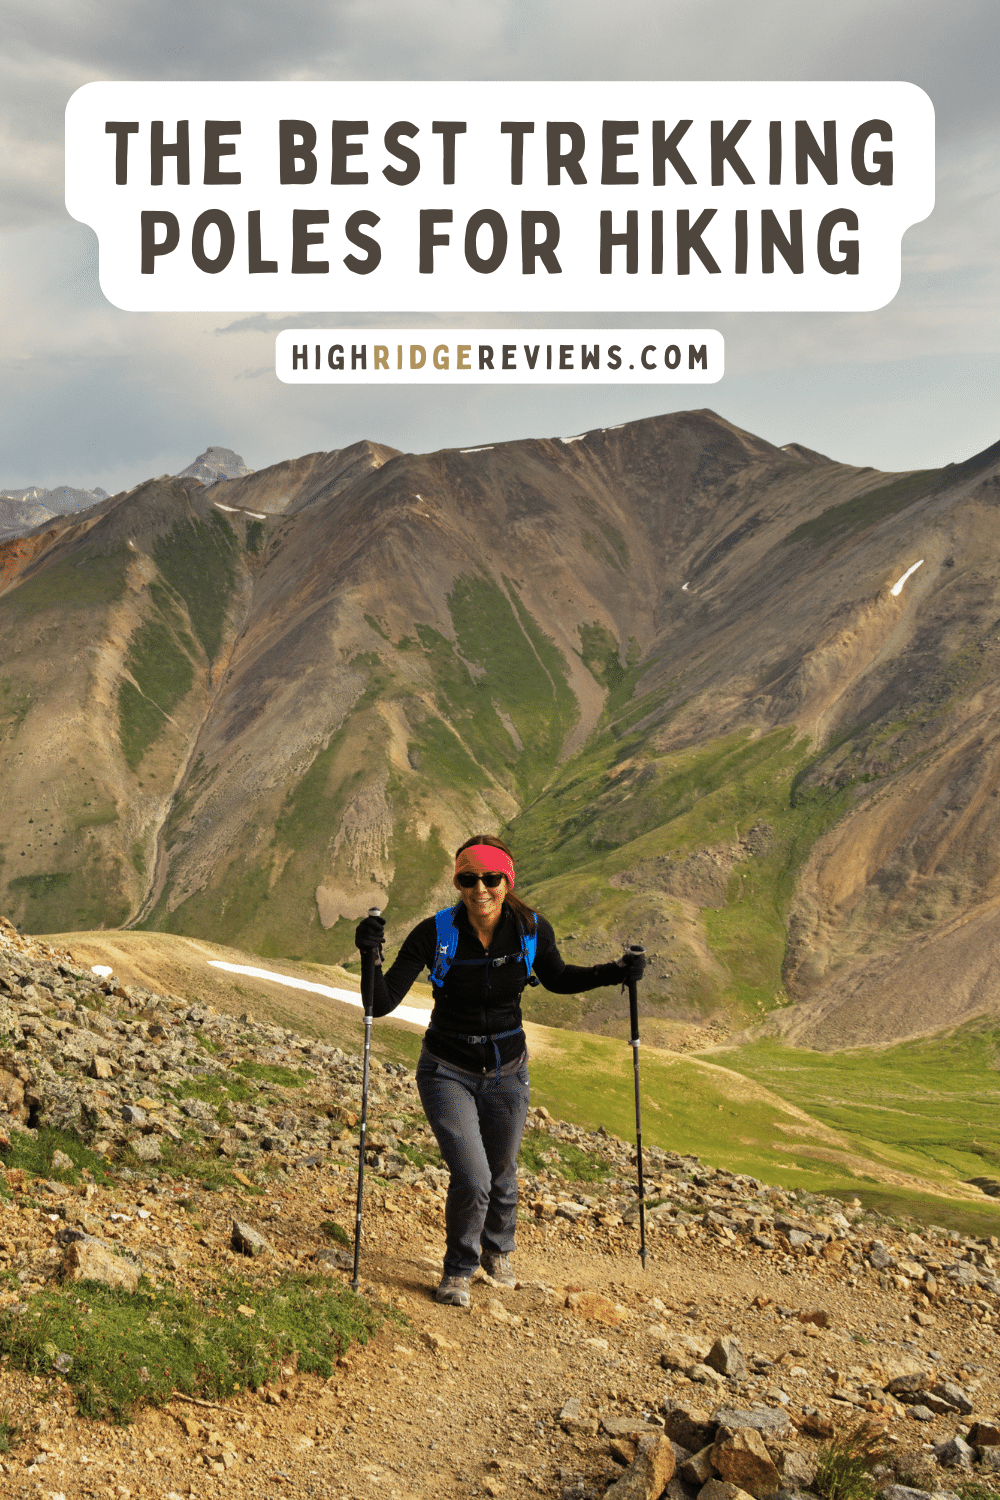 Pack Light, Hike Right: The Best Lightweight Hiking Poles